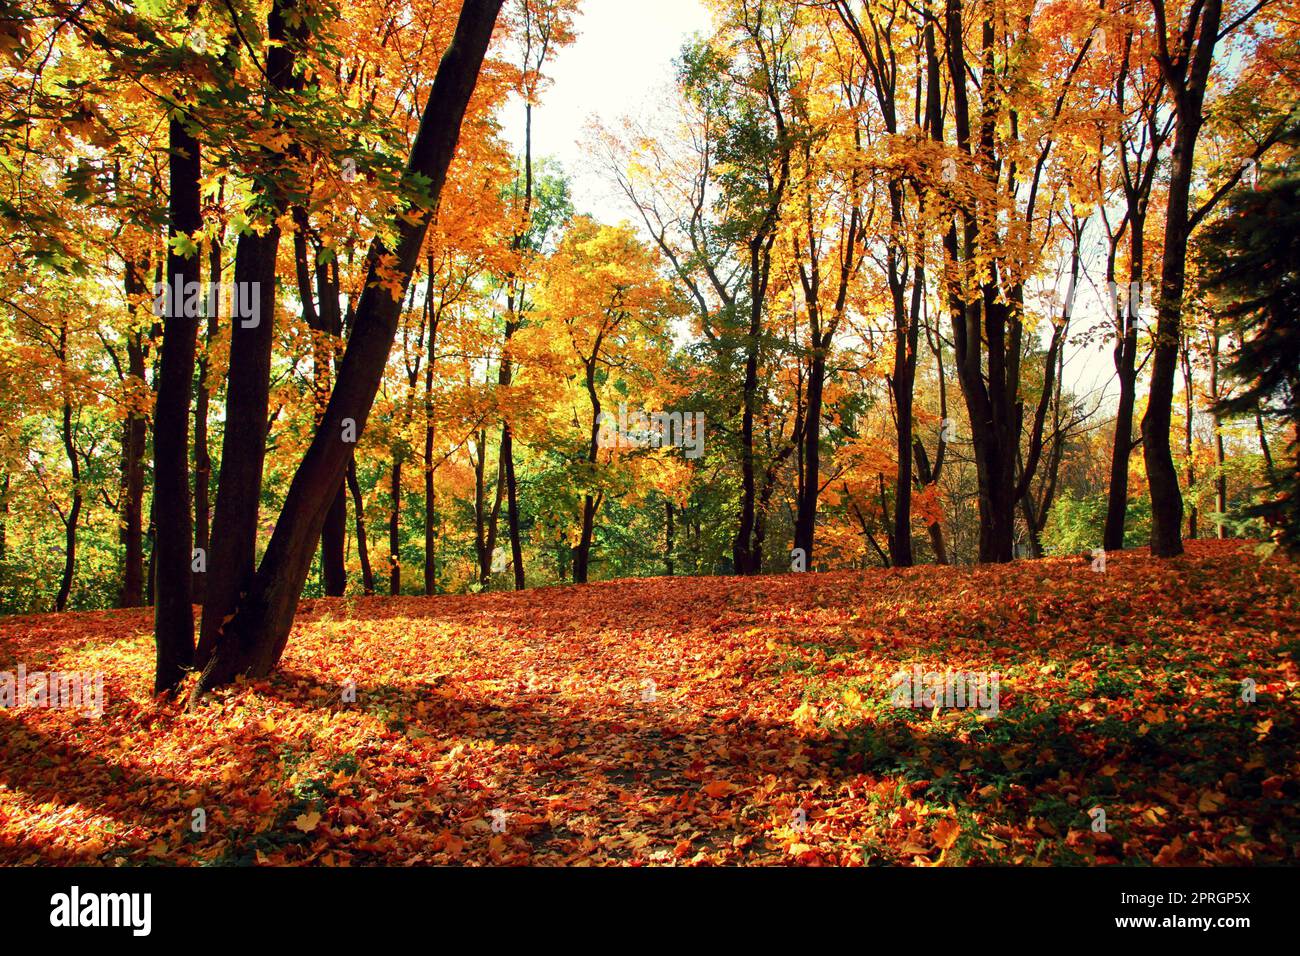 Colorful bright leaves falling in autumnal park. Stock Photo